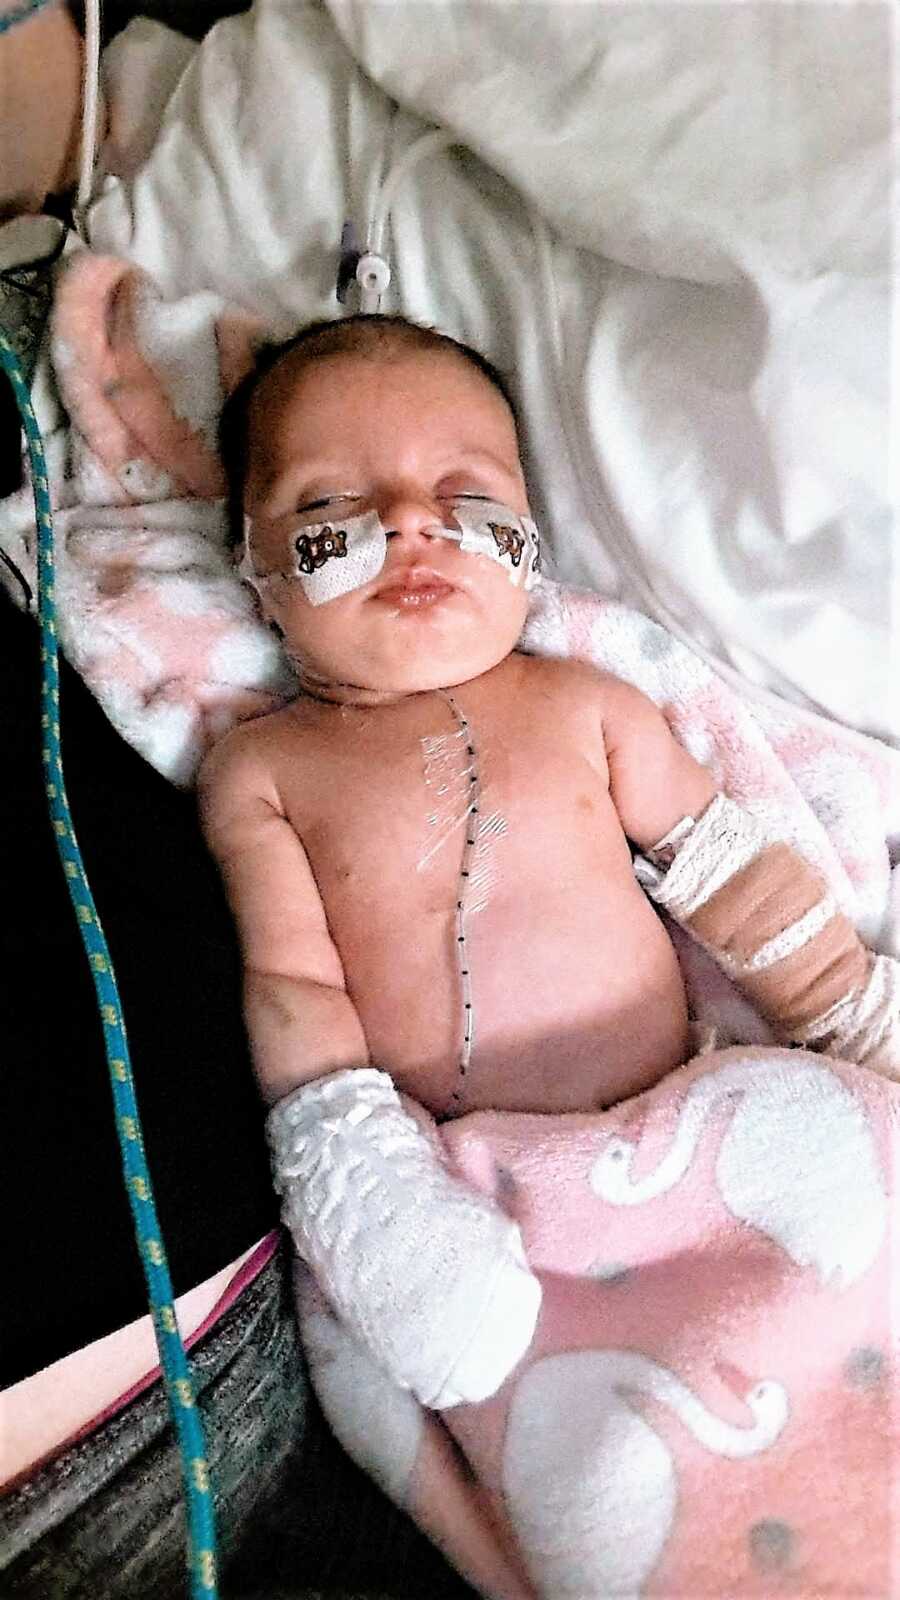 little girl in the hospital getting tests